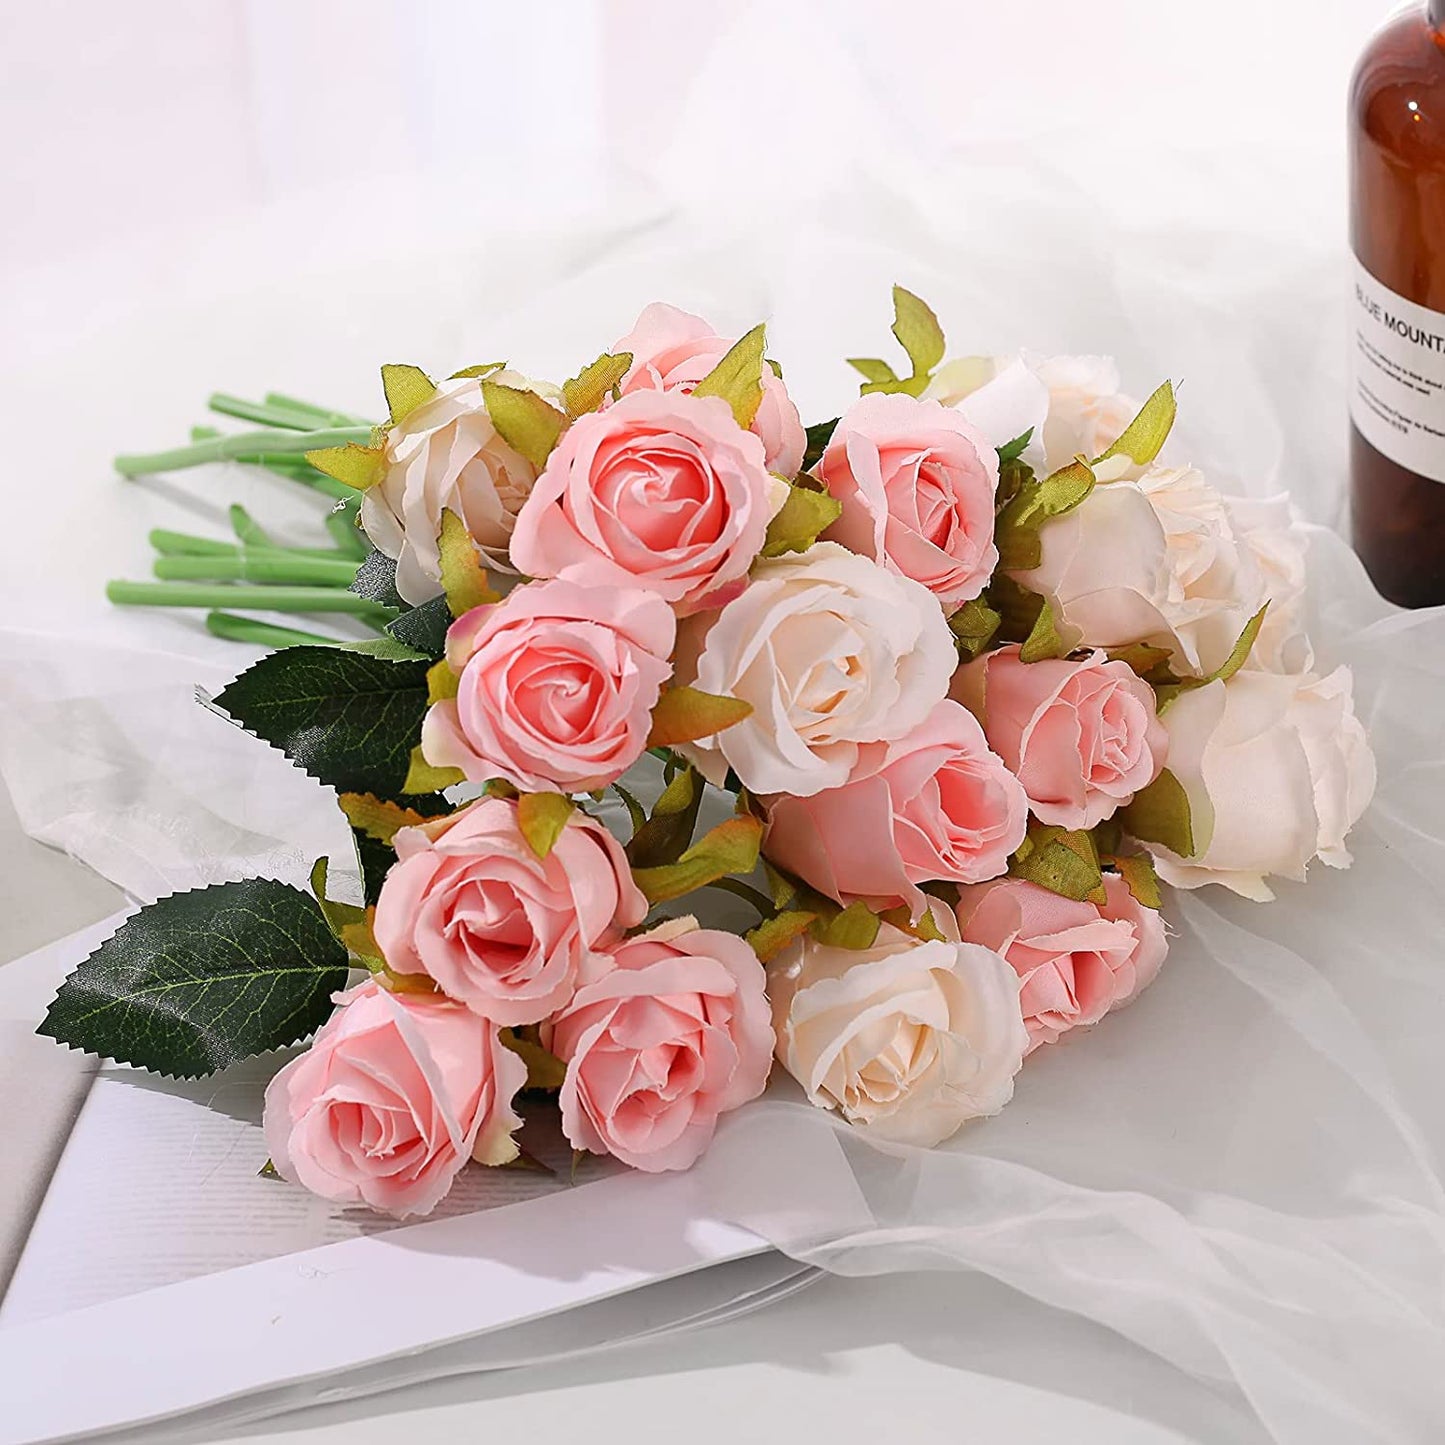 HomeXO 12 Pcs Rose Flowers Artificial Faux Silk Roses Height 10.6" Pink Cream White Color ,12 pcs  Leaves and Stems Real Looking Roses for Vases DIY Bouquets  (Pink,Cream White)